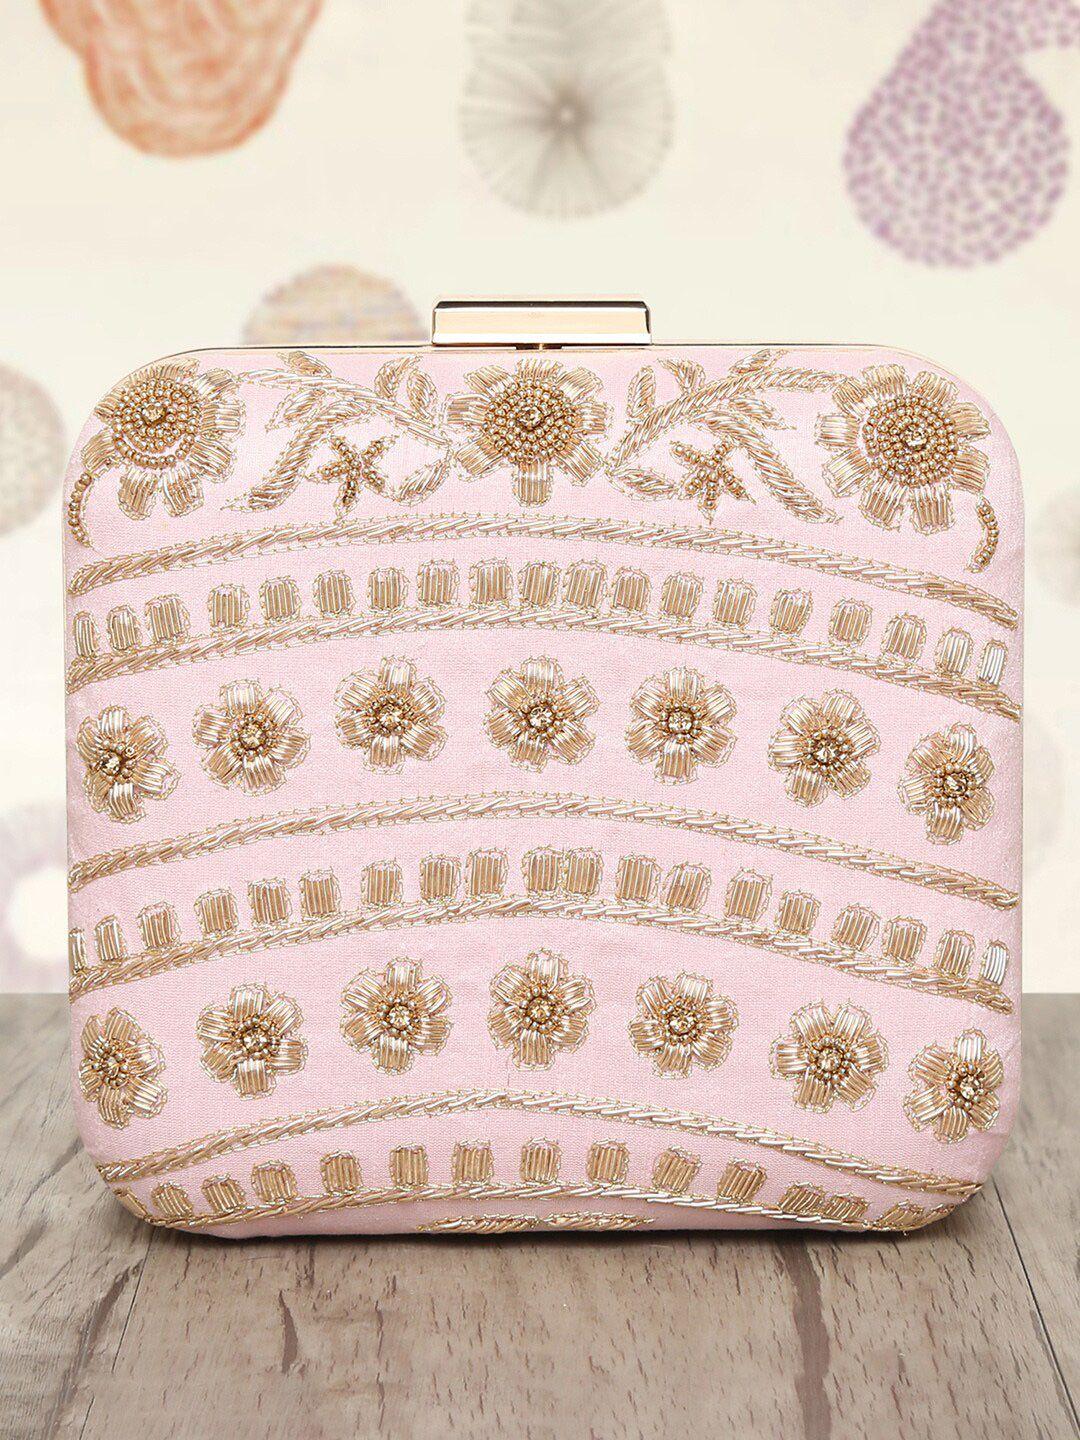 peora pink & gold-toned embellished purse clutch